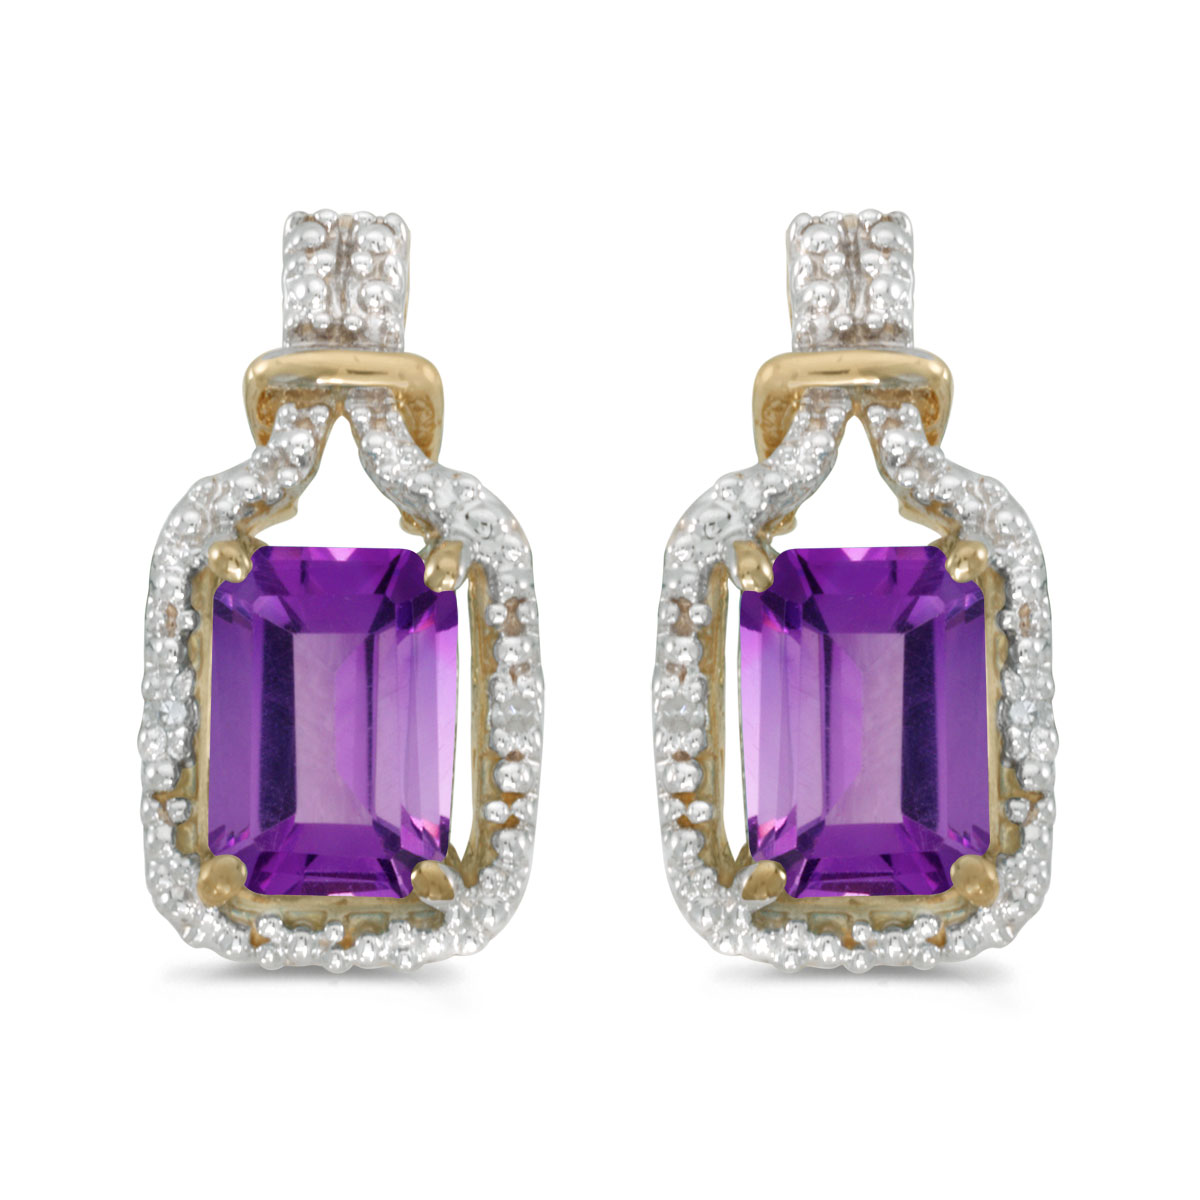 JCX2039: These 14k yellow gold emerald-cut amethyst and diamond earrings feature 7x5 mm genuine natural amethysts with a 1.54 ct total weight and sparkling diamond accents.